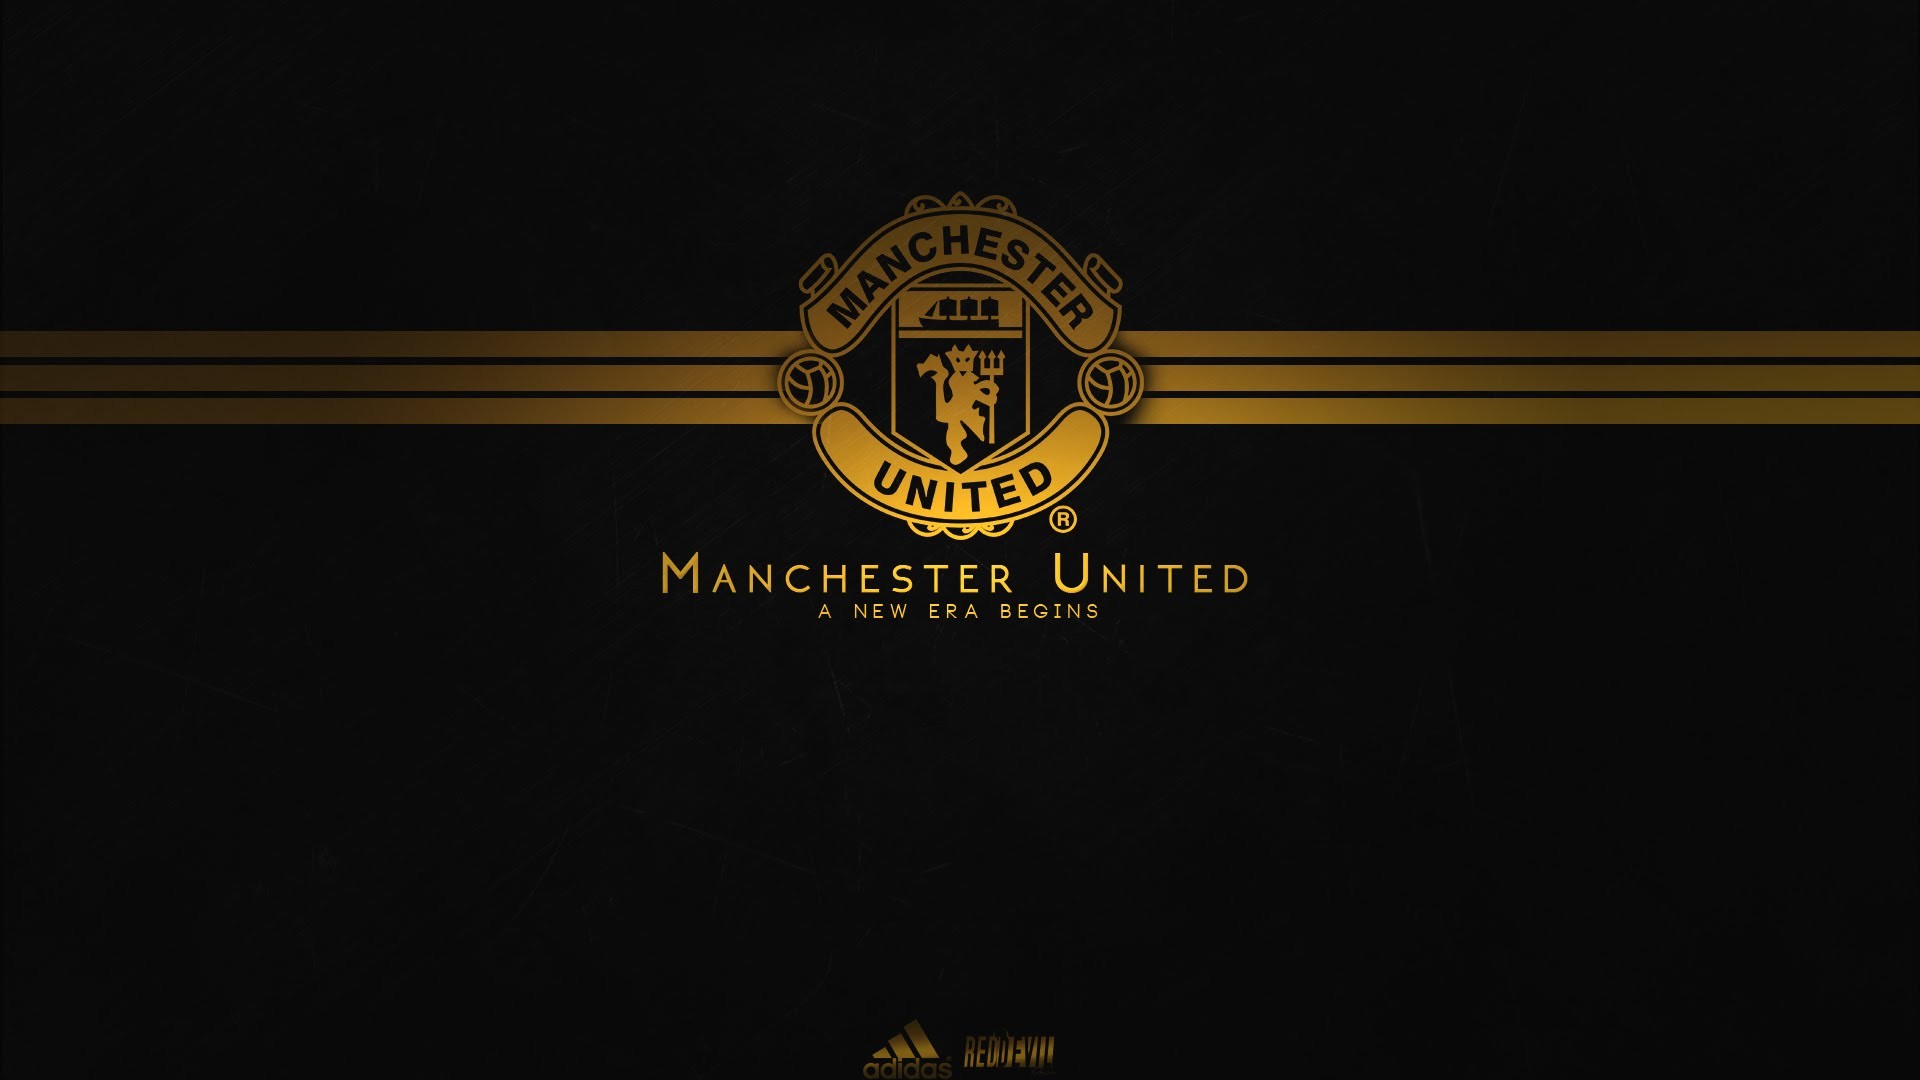 1920x1080 Manchester United Logo Wallpapers HD 2016 - Wallpaper Cave